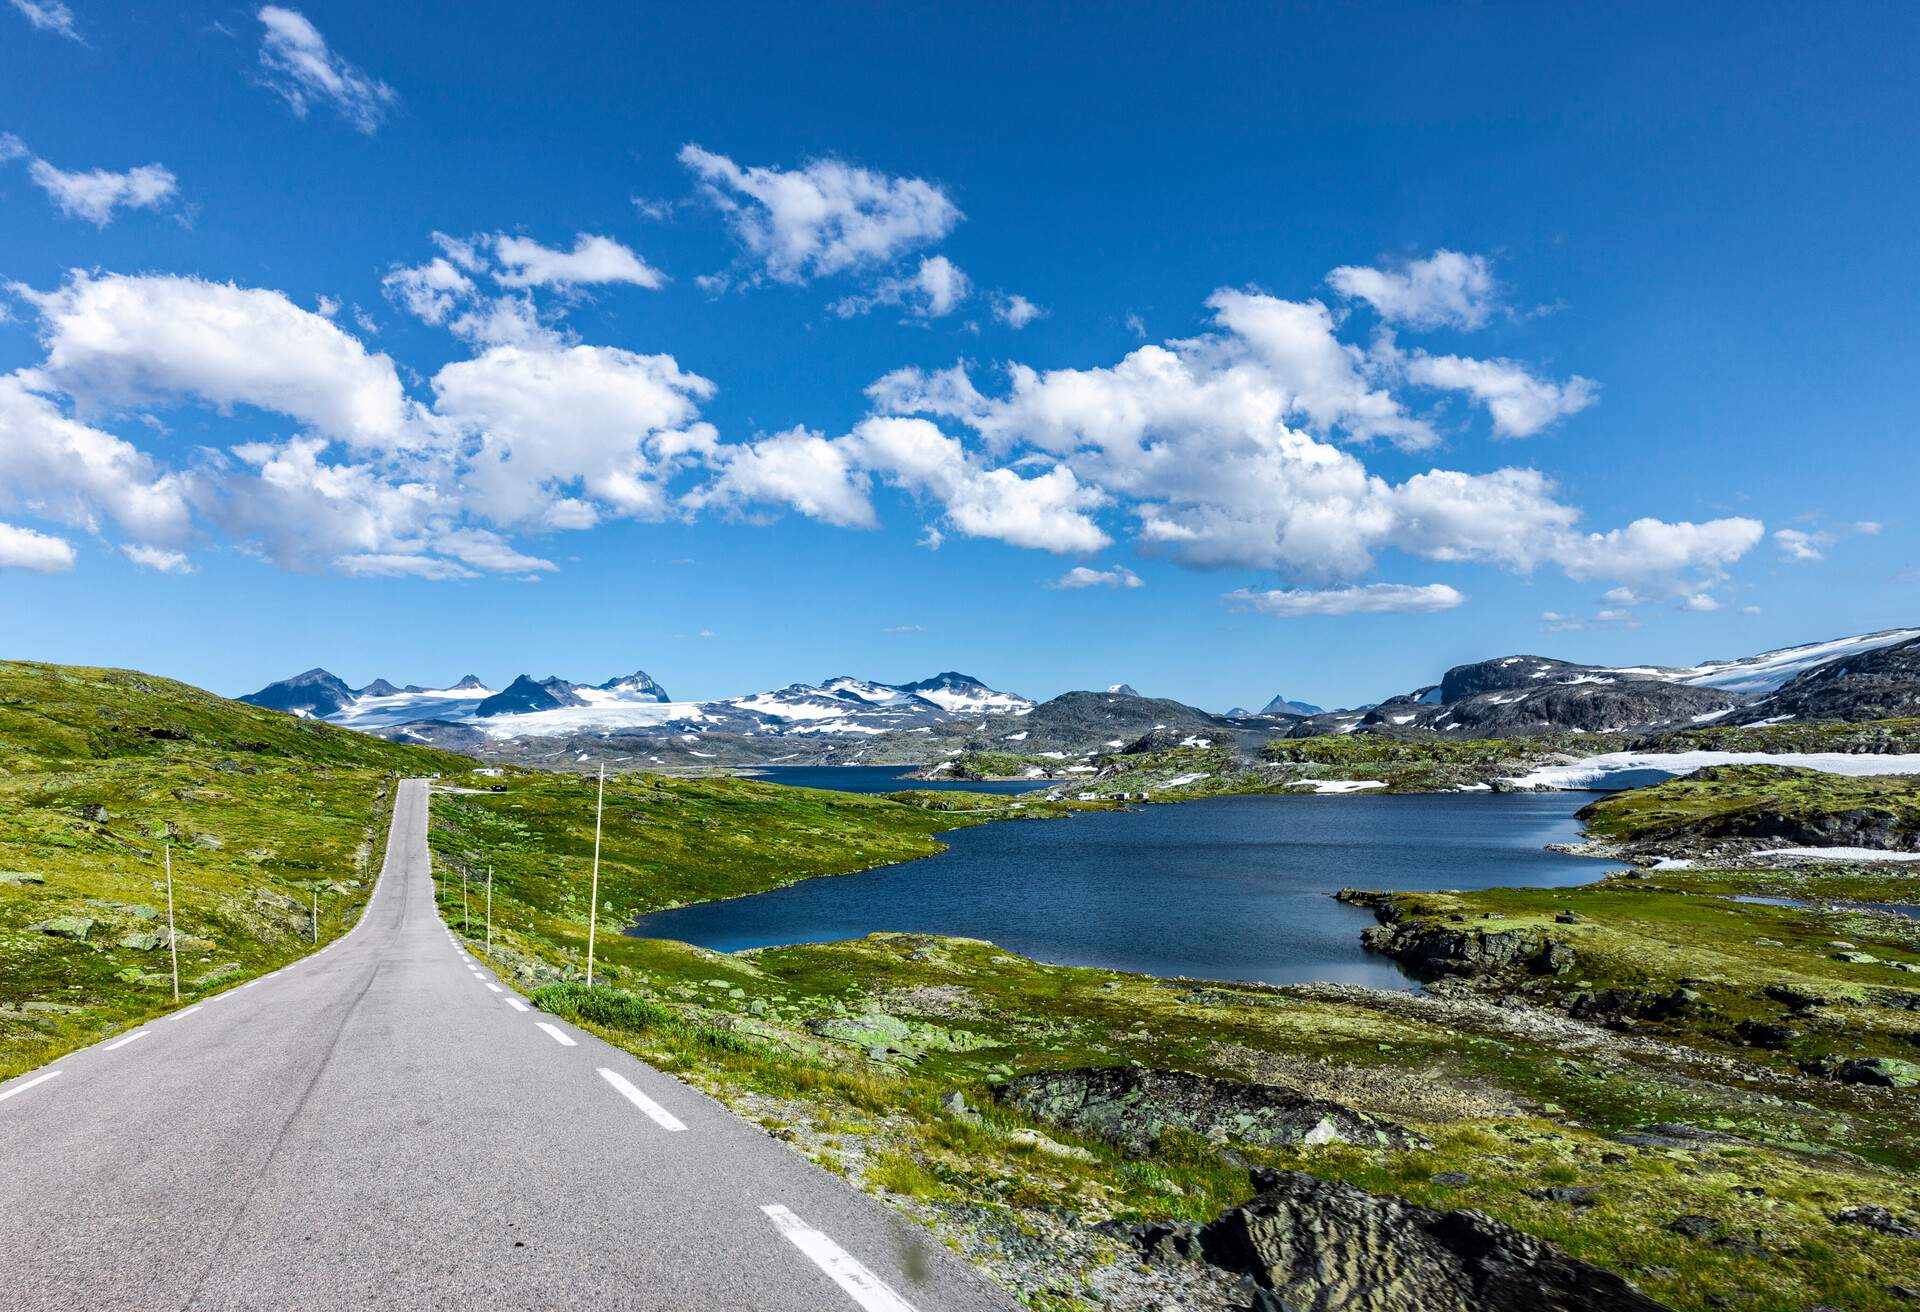 Road no. 55 on the Sognefjell in Jotunheimen / Norway